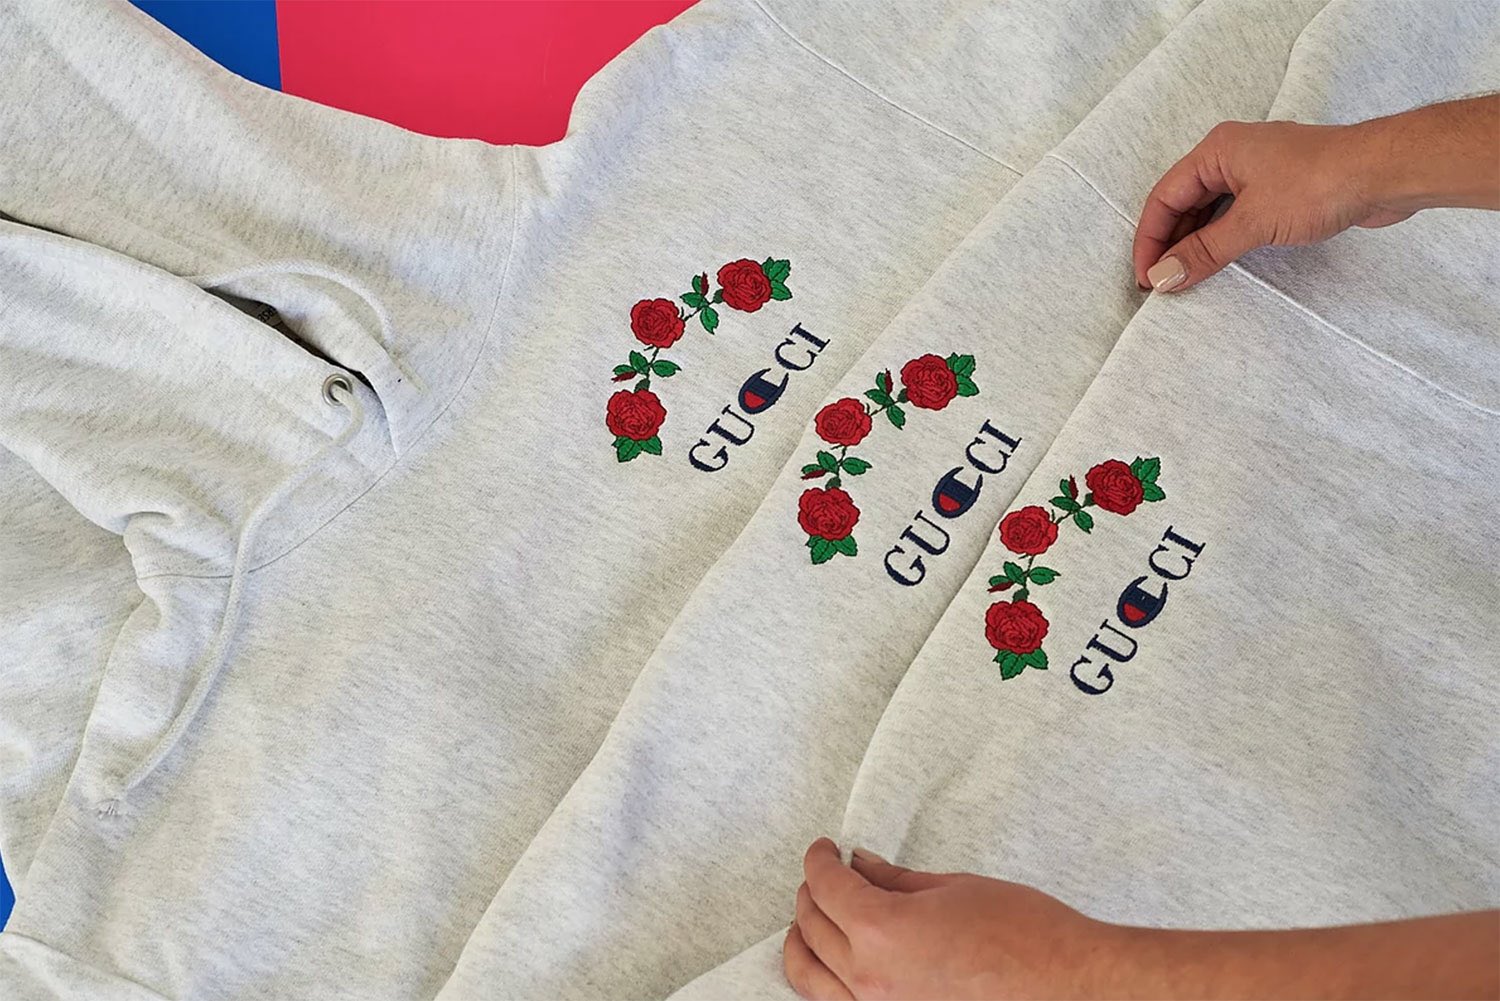 Menics & Co. Twitter: "#AvaNirui finally drops her #GUCCI x #Champion custom hoodie and it's limited to pieces. https://t.co/HtFM7Wtyy5" / X